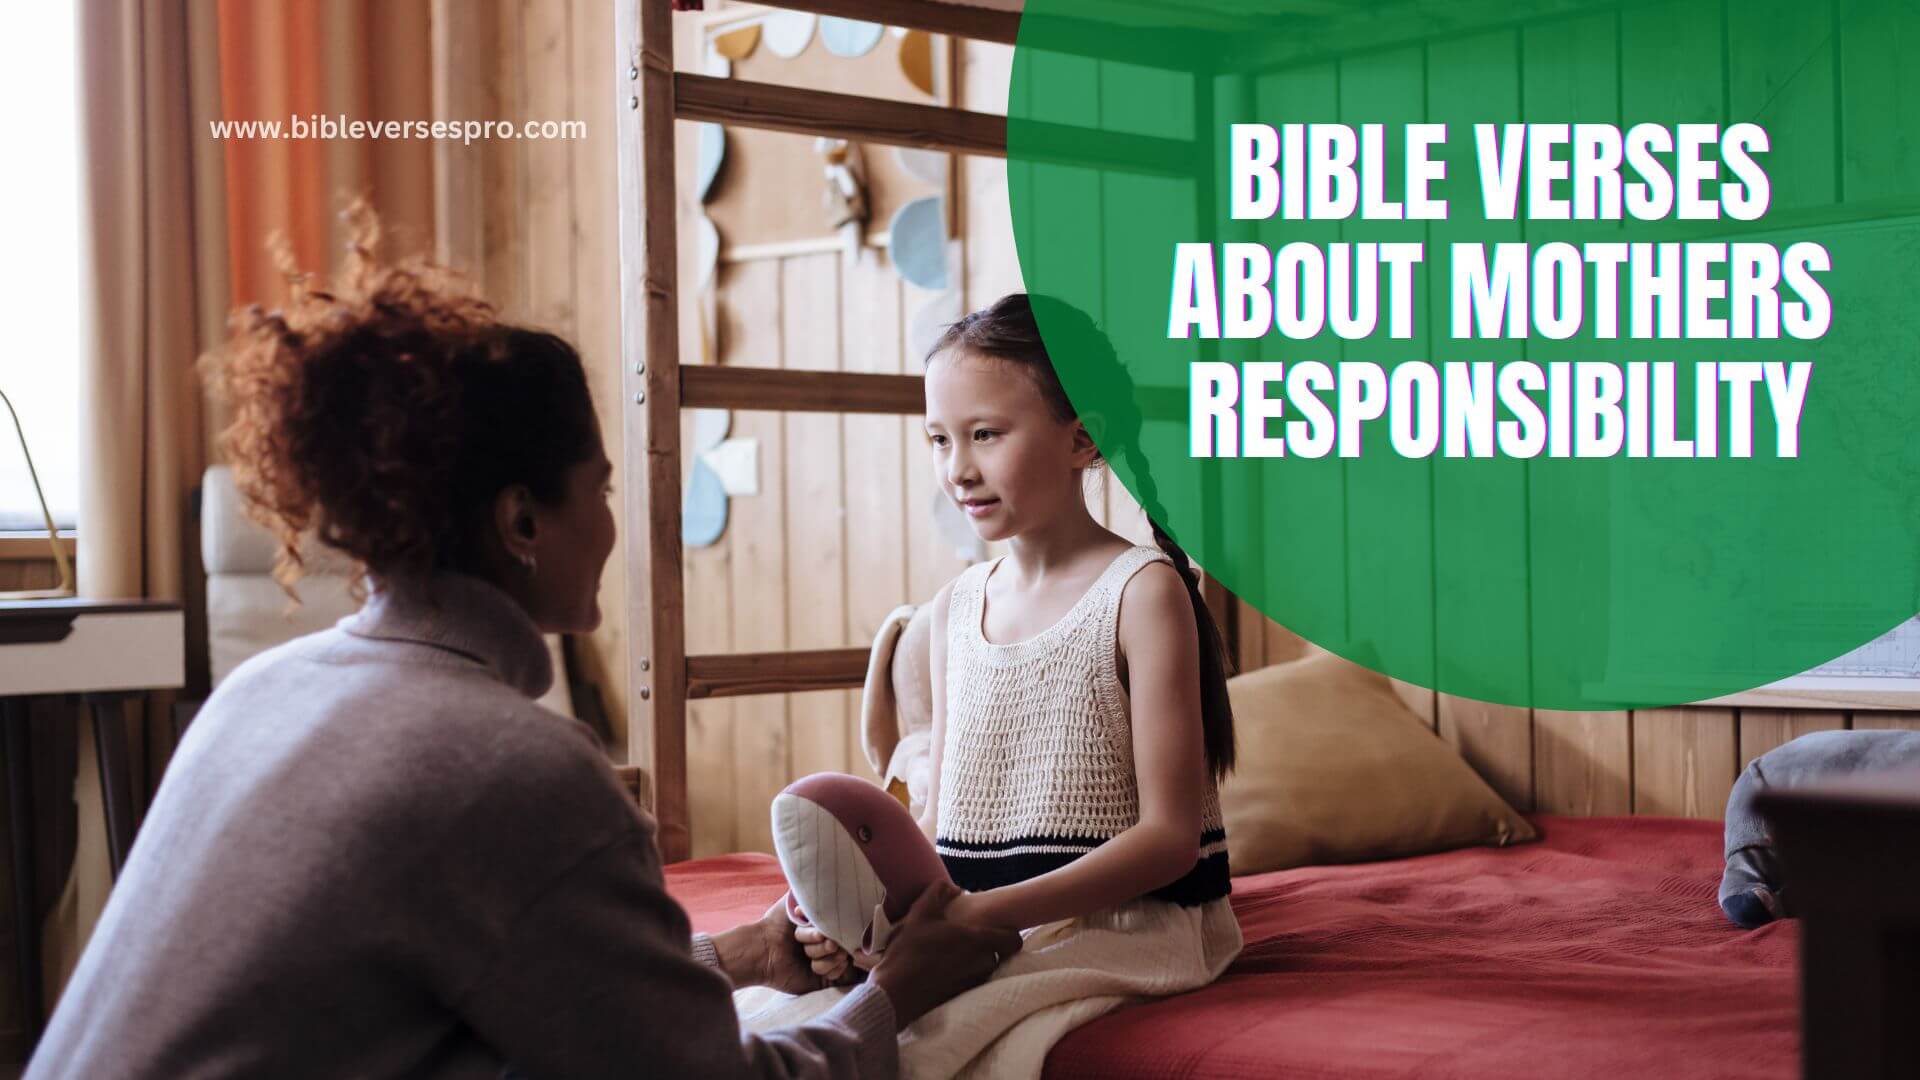 BIBLE VERSES ABOUT MOTHERS RESPONSIBILITY